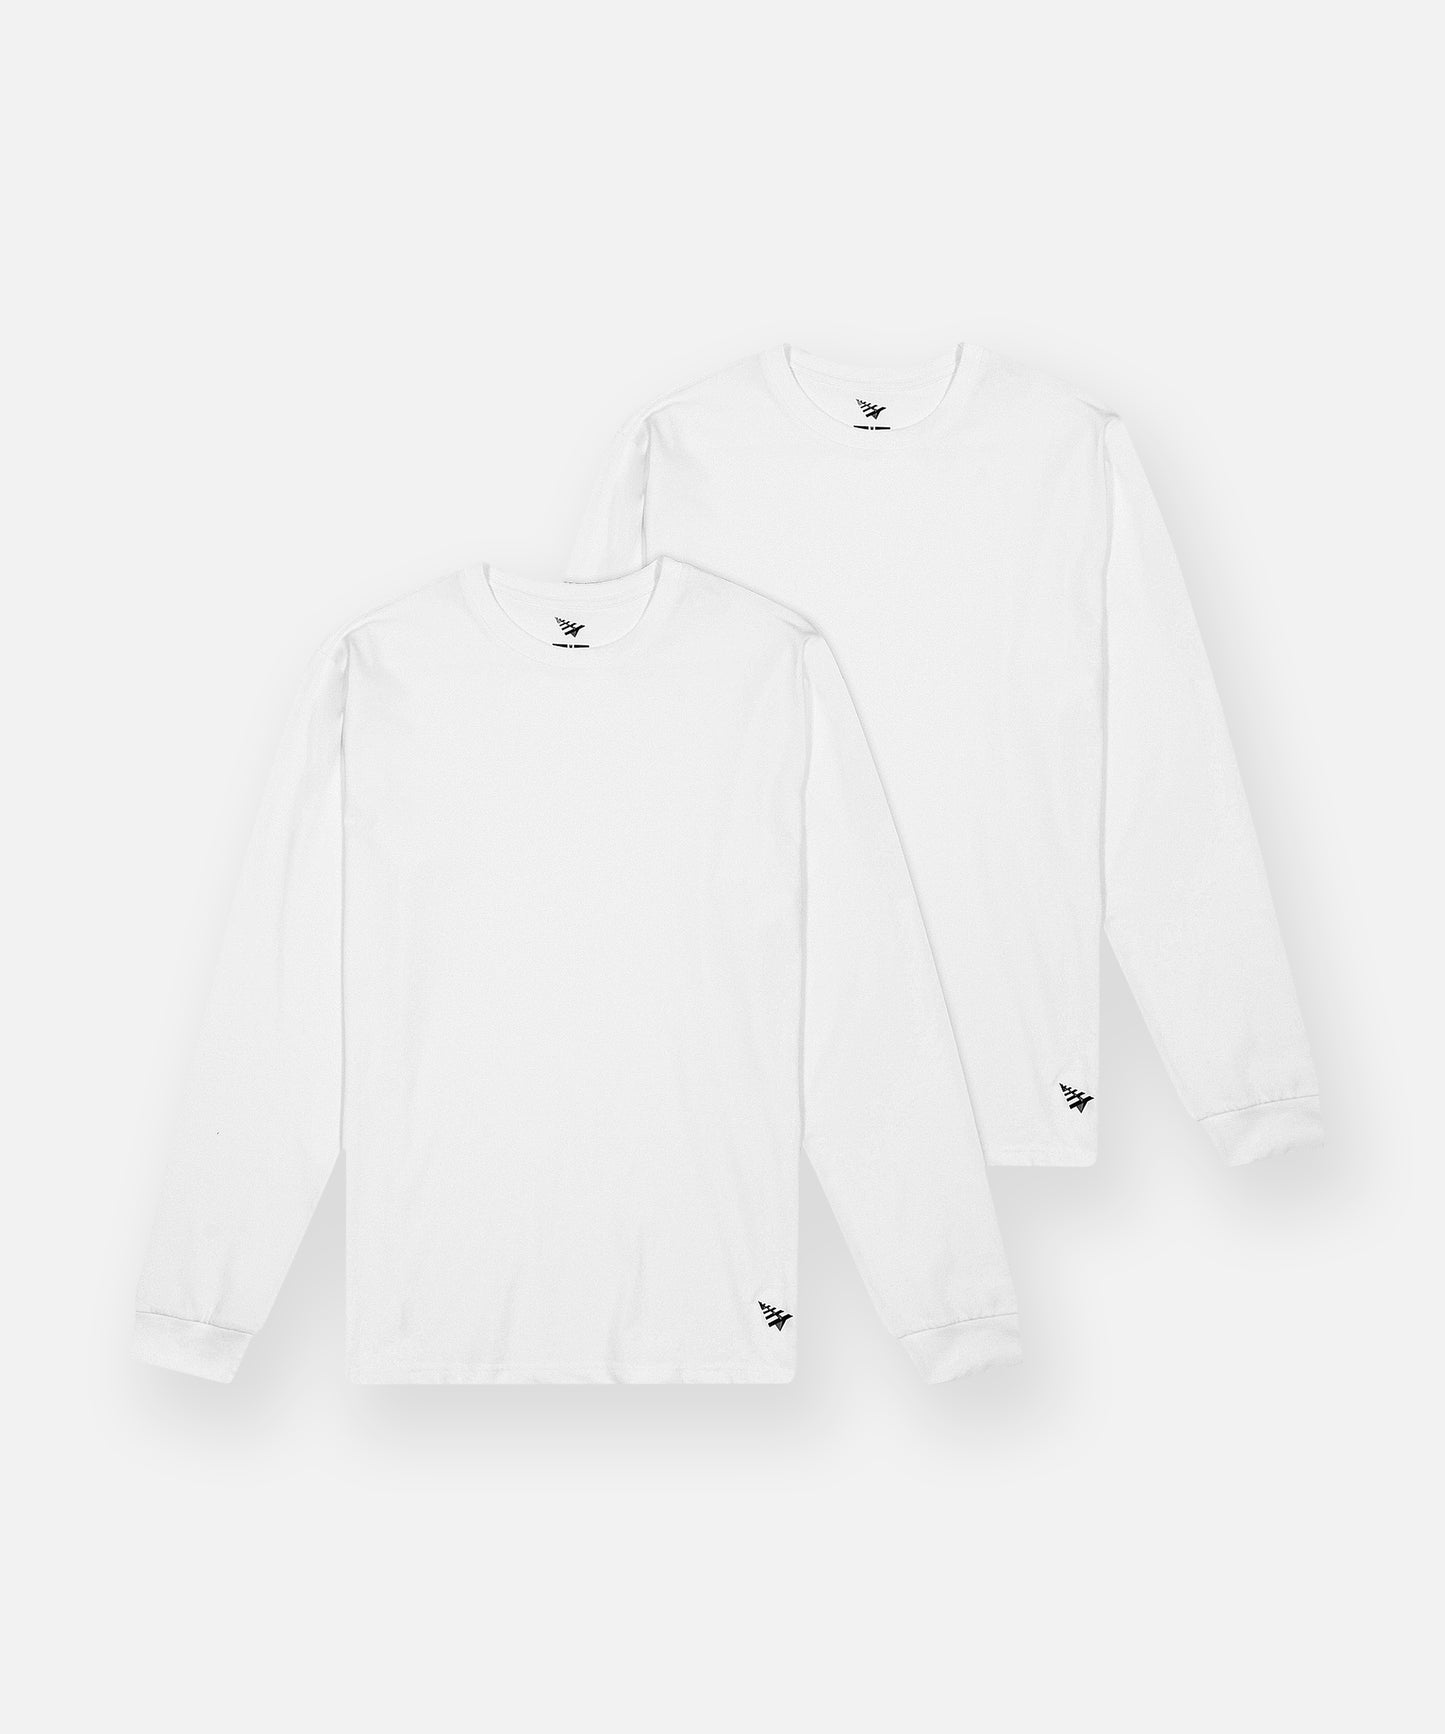 CUSTOM_ALT_TEXT: Paper Planes Essential 2-Pack Long Sleeve Tee, color White.